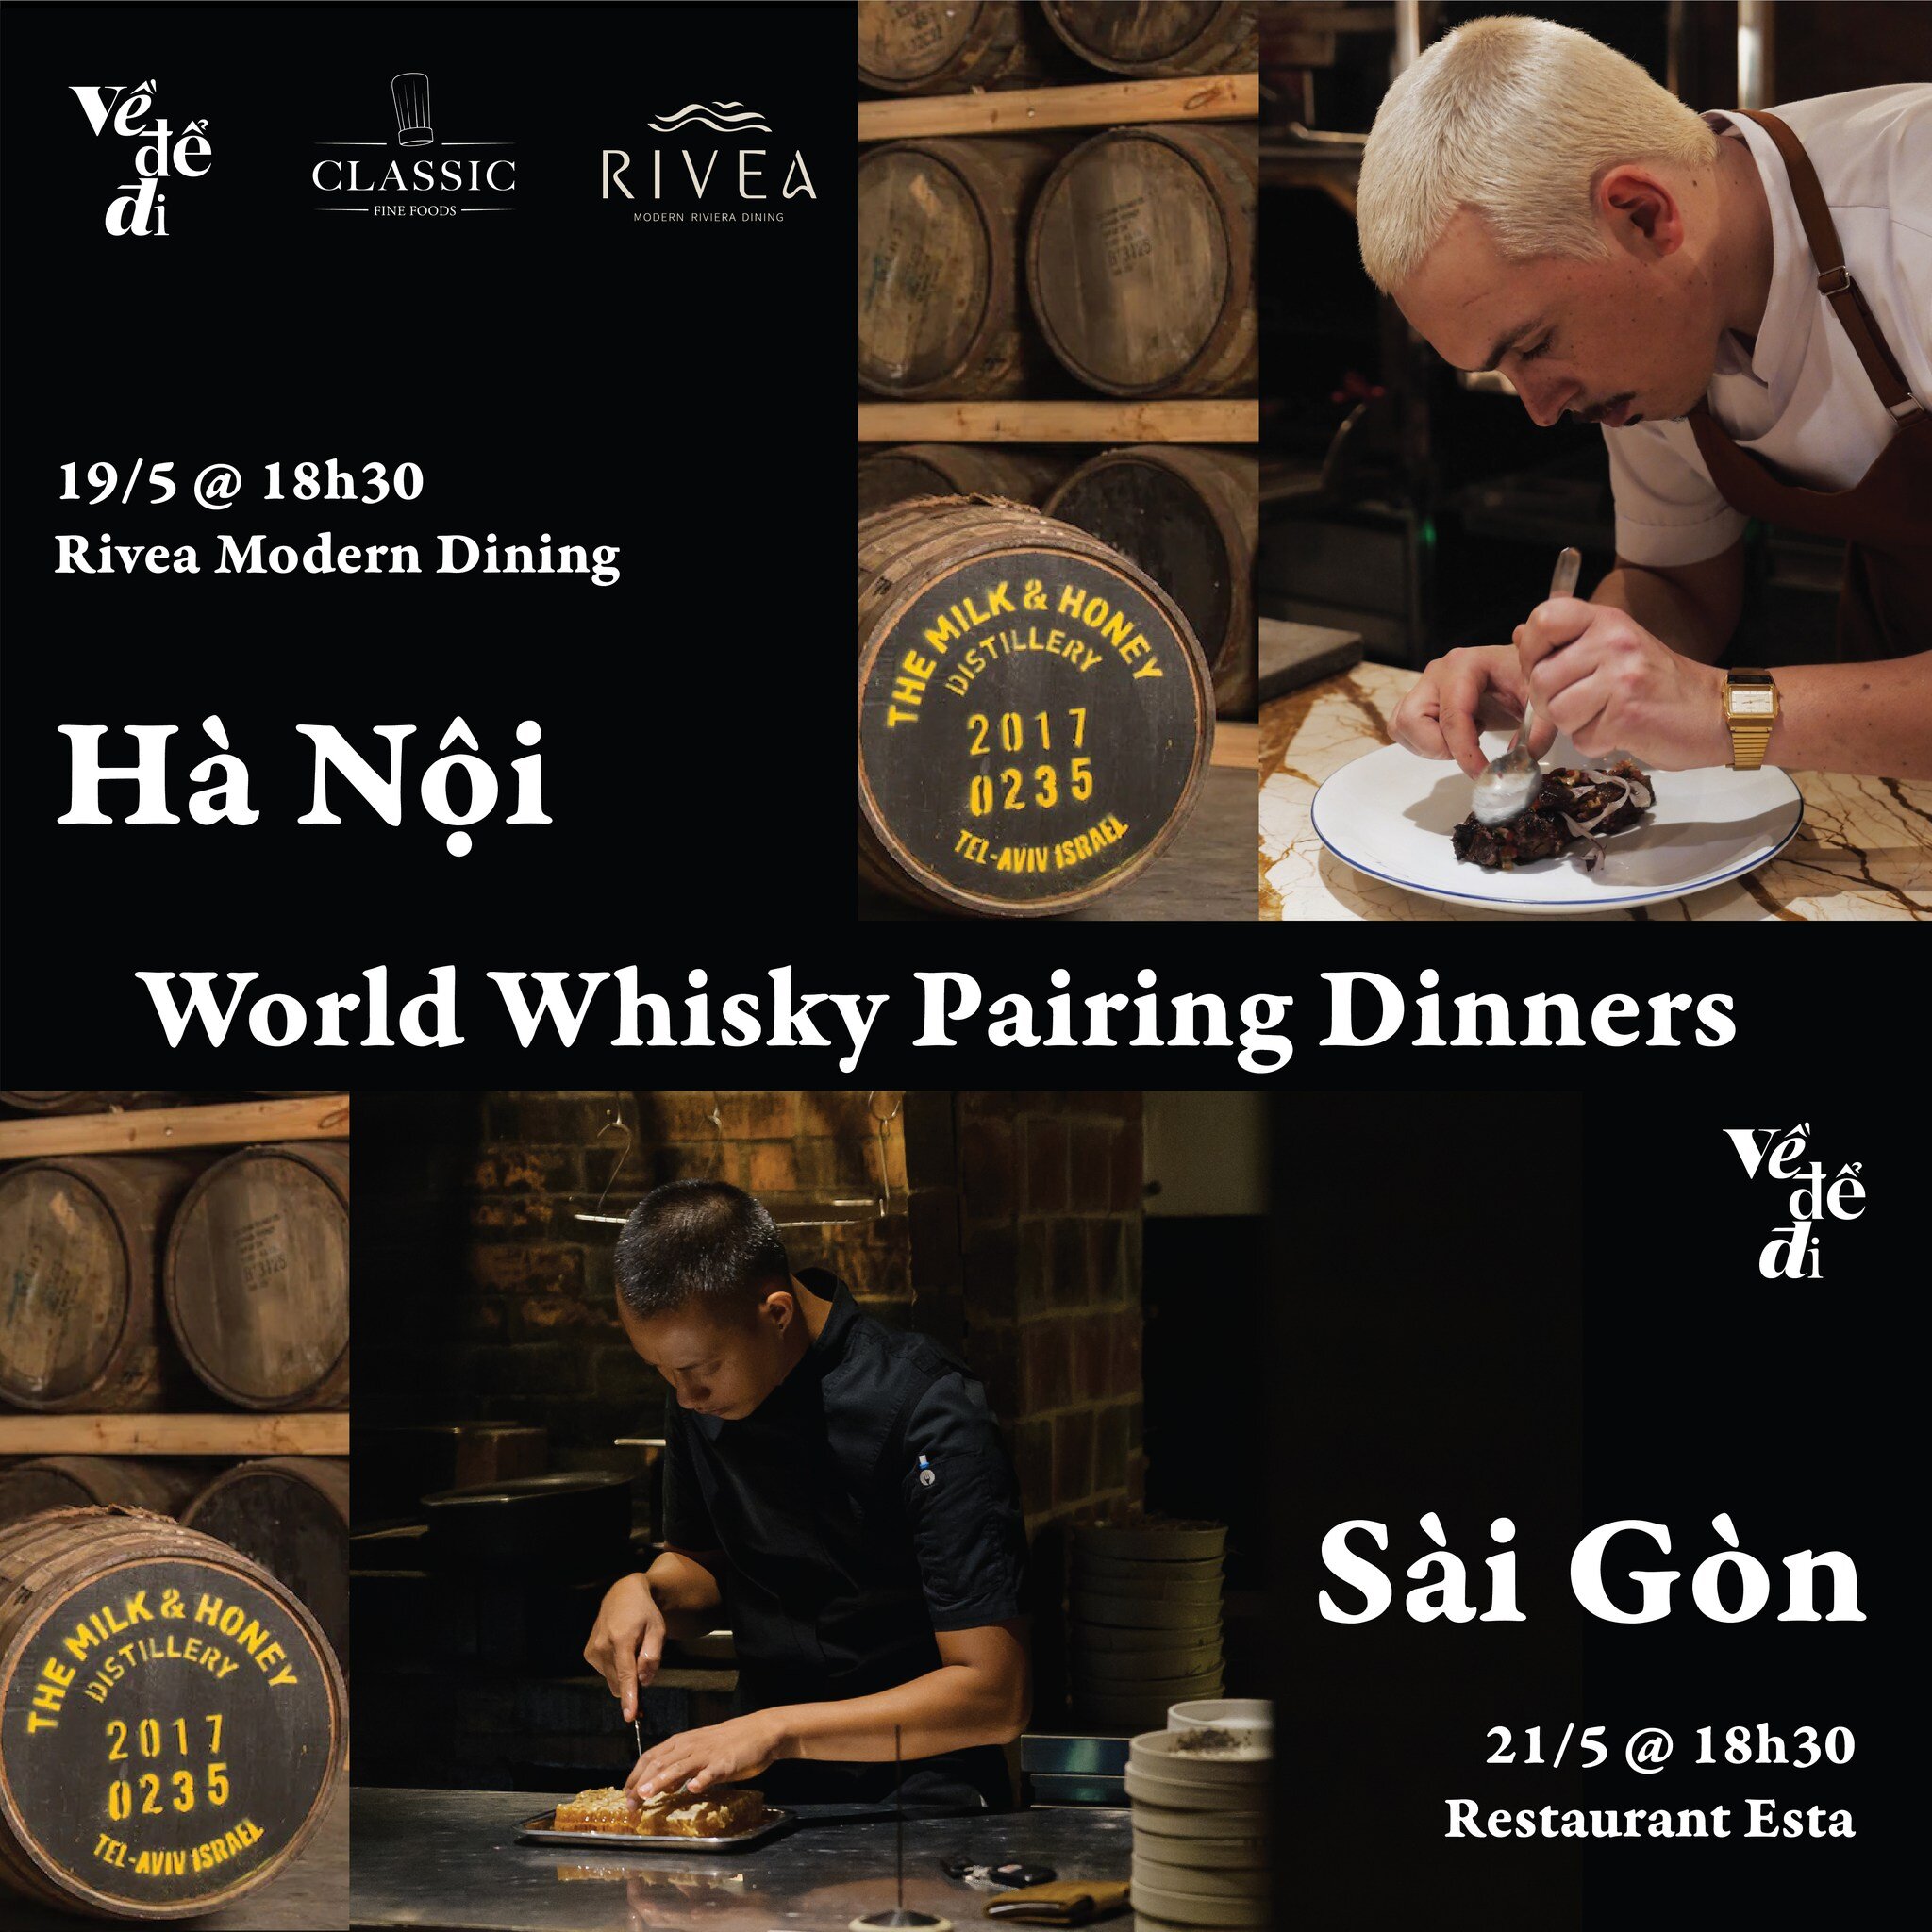 Two phenomenal World Whisky pairing dinners are coming up, one in S&agrave;i G&ograve;n, one in H&agrave; Nội. Don&rsquo;t miss the chance for a seat at these exclusive events.

Join us for a glass of exceptionally rare whisky from the distiller of t